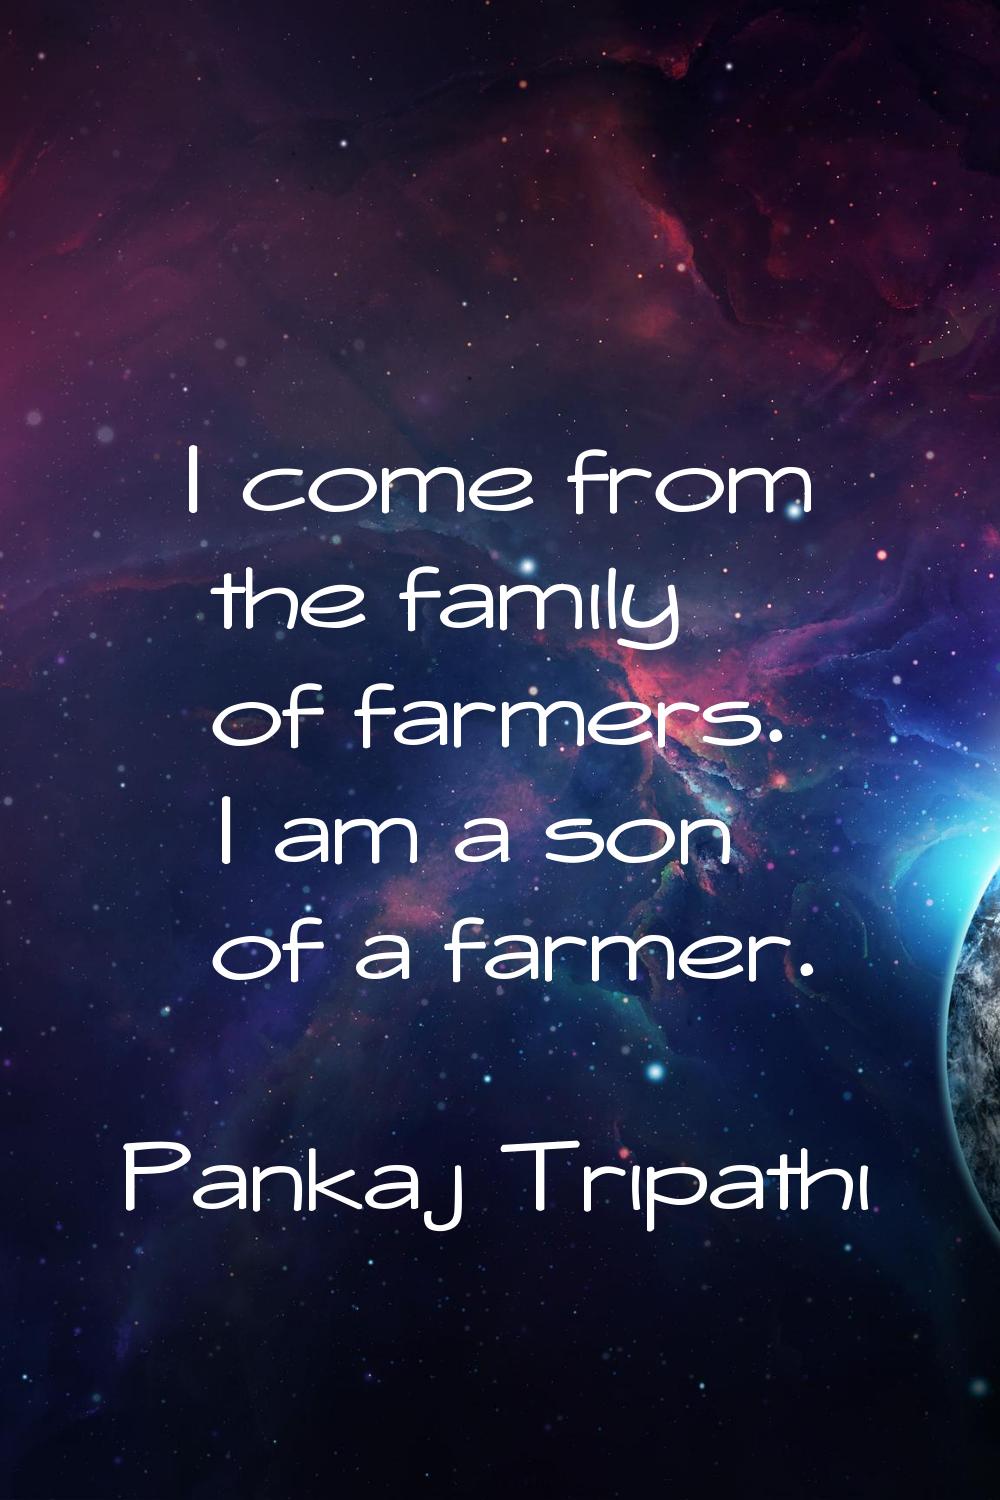 I come from the family of farmers. I am a son of a farmer.